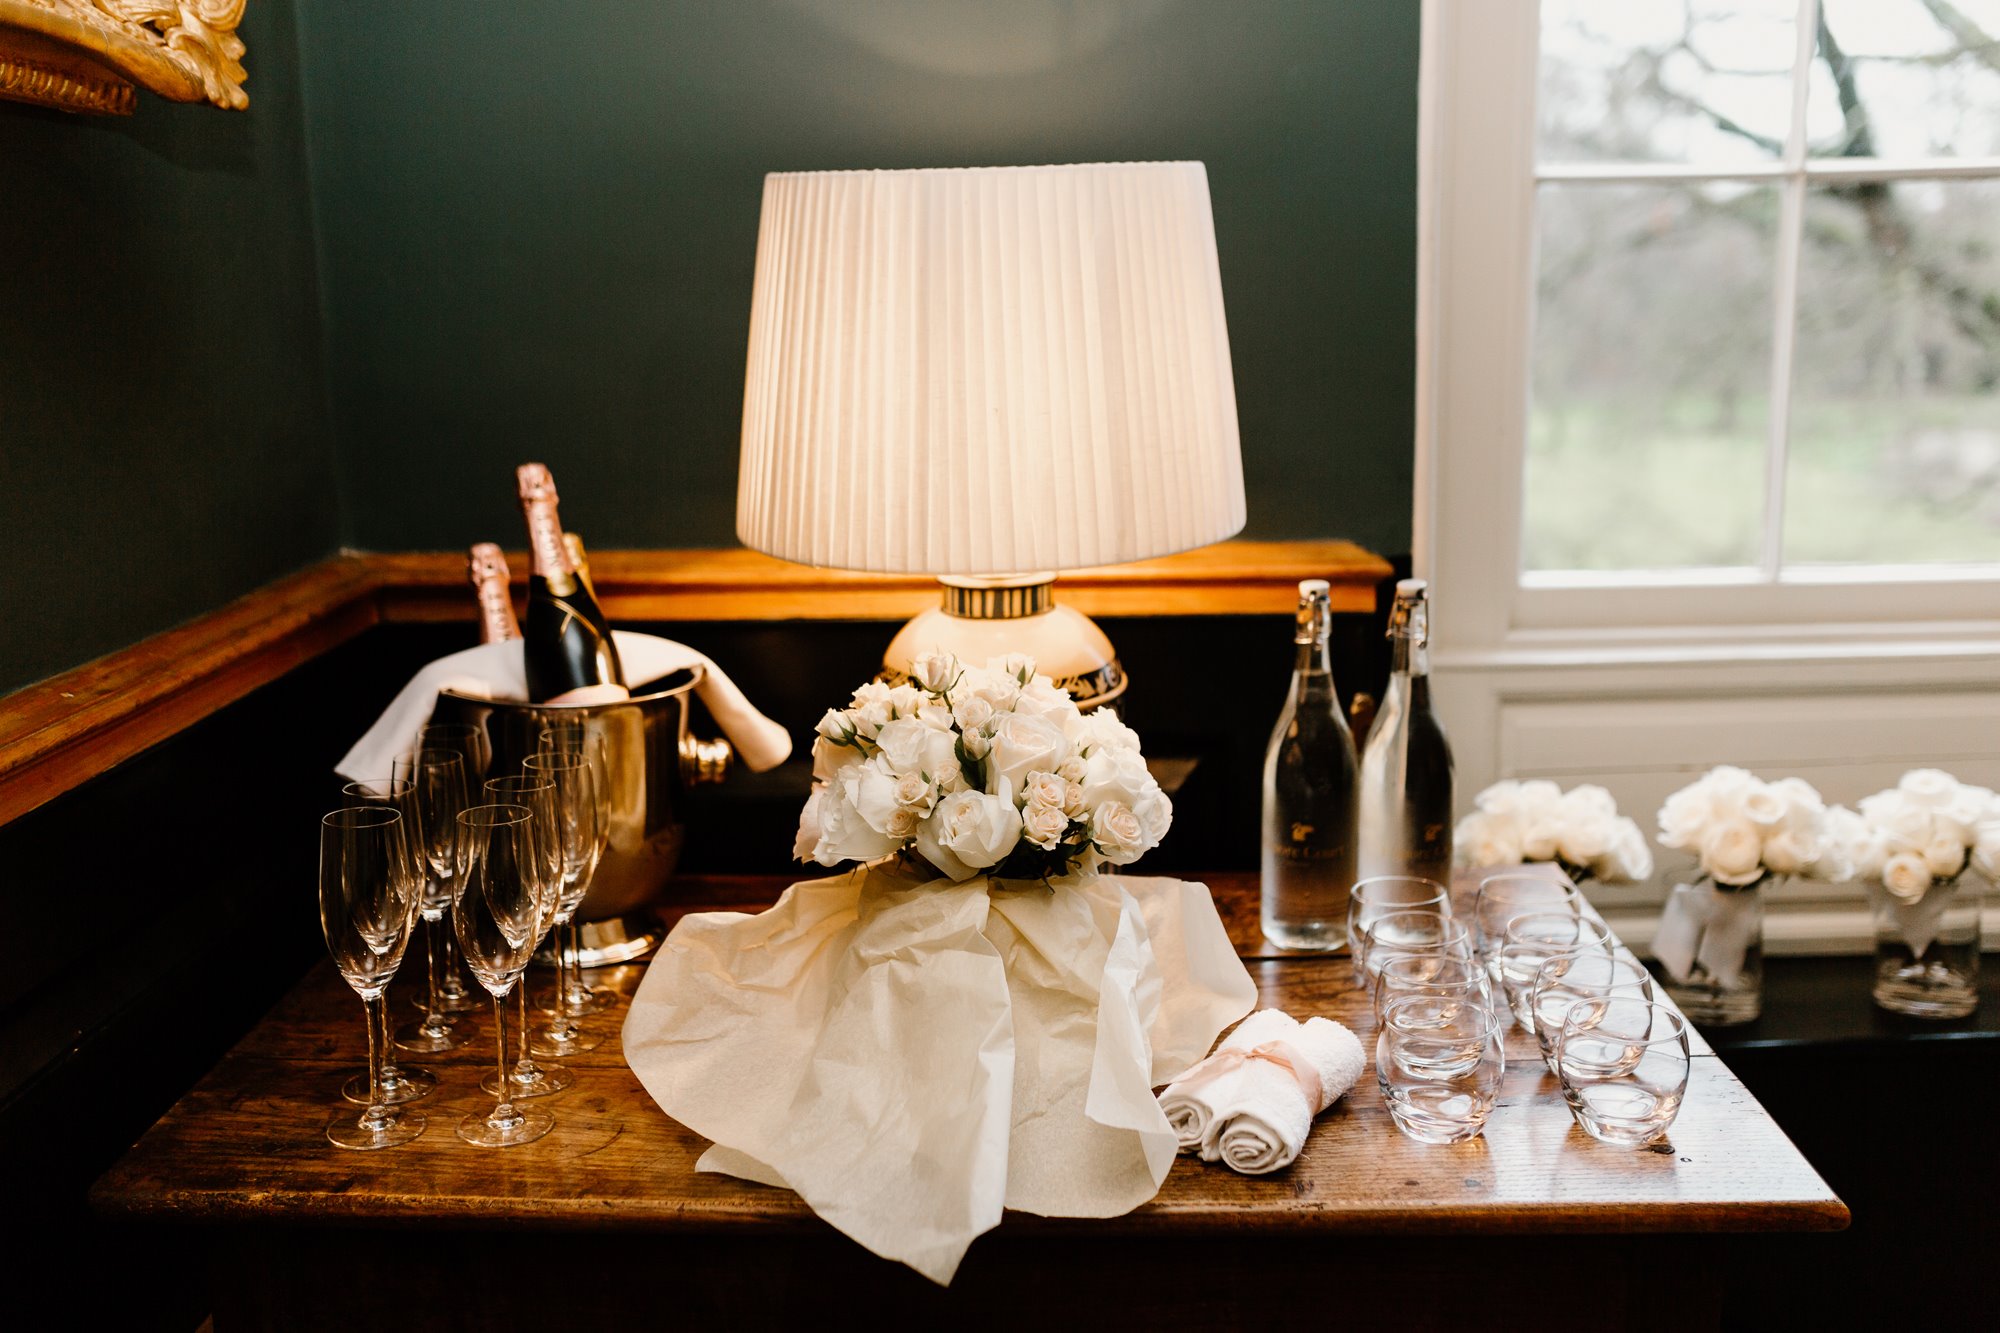 Bottles of champagne cooling on a table setting, in preparation for toasts at a wedding reception